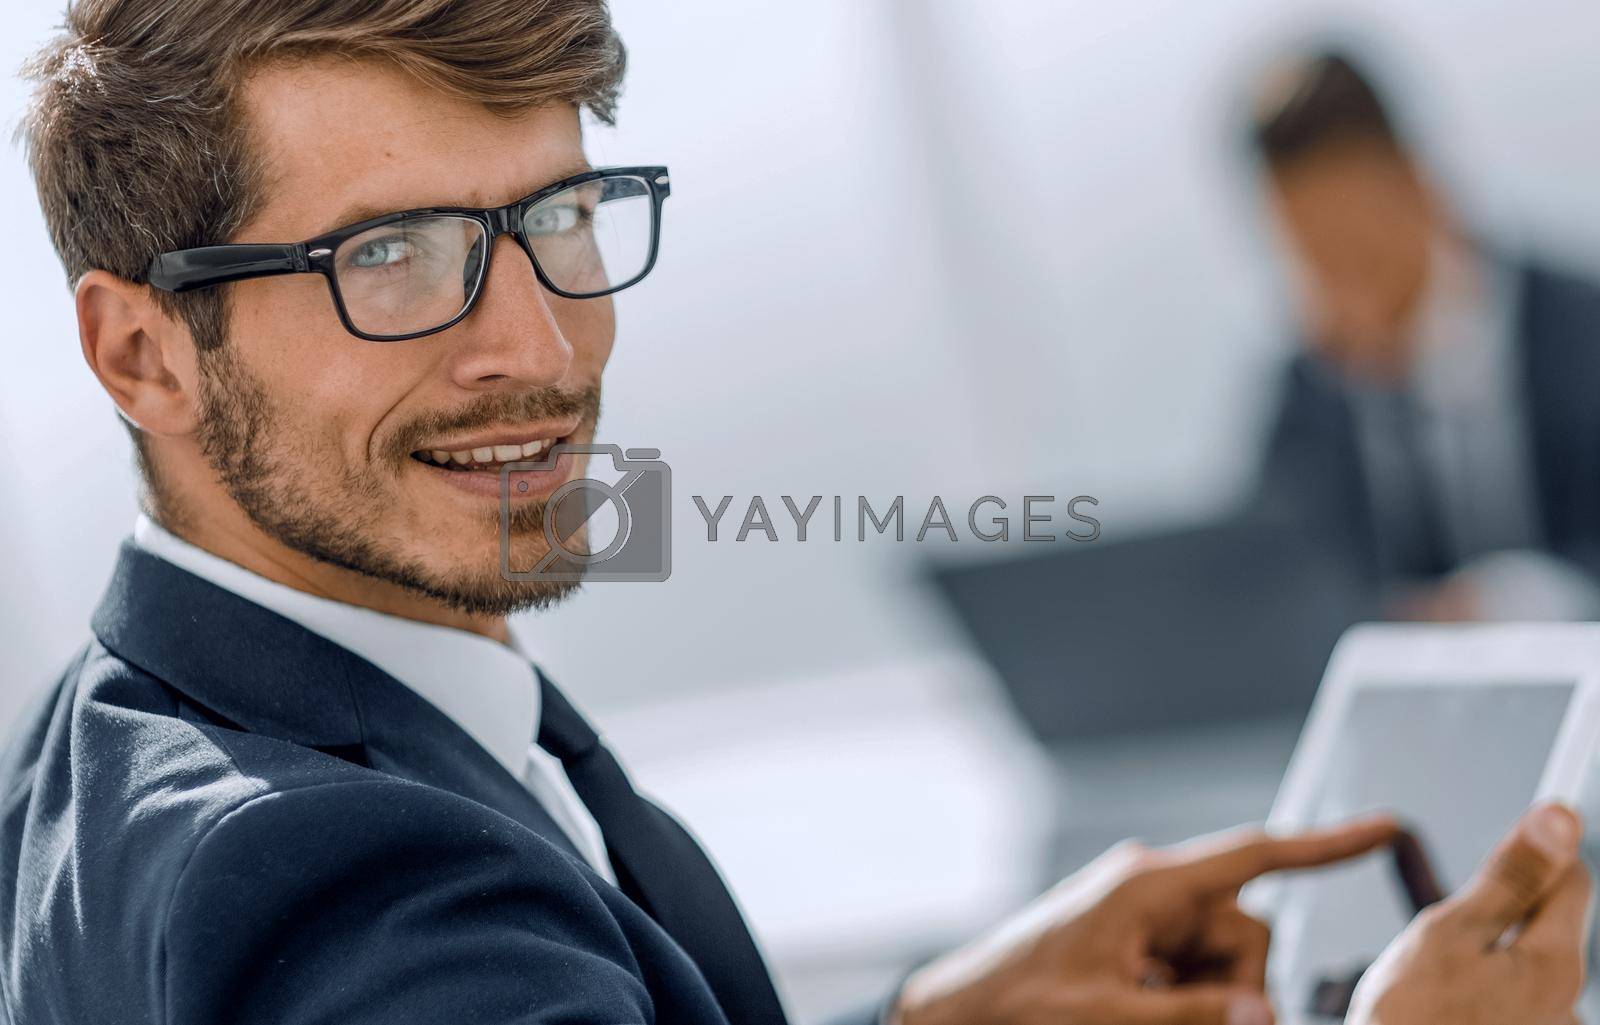 Royalty free image of man looks at camera and smiles using tablet by asdf